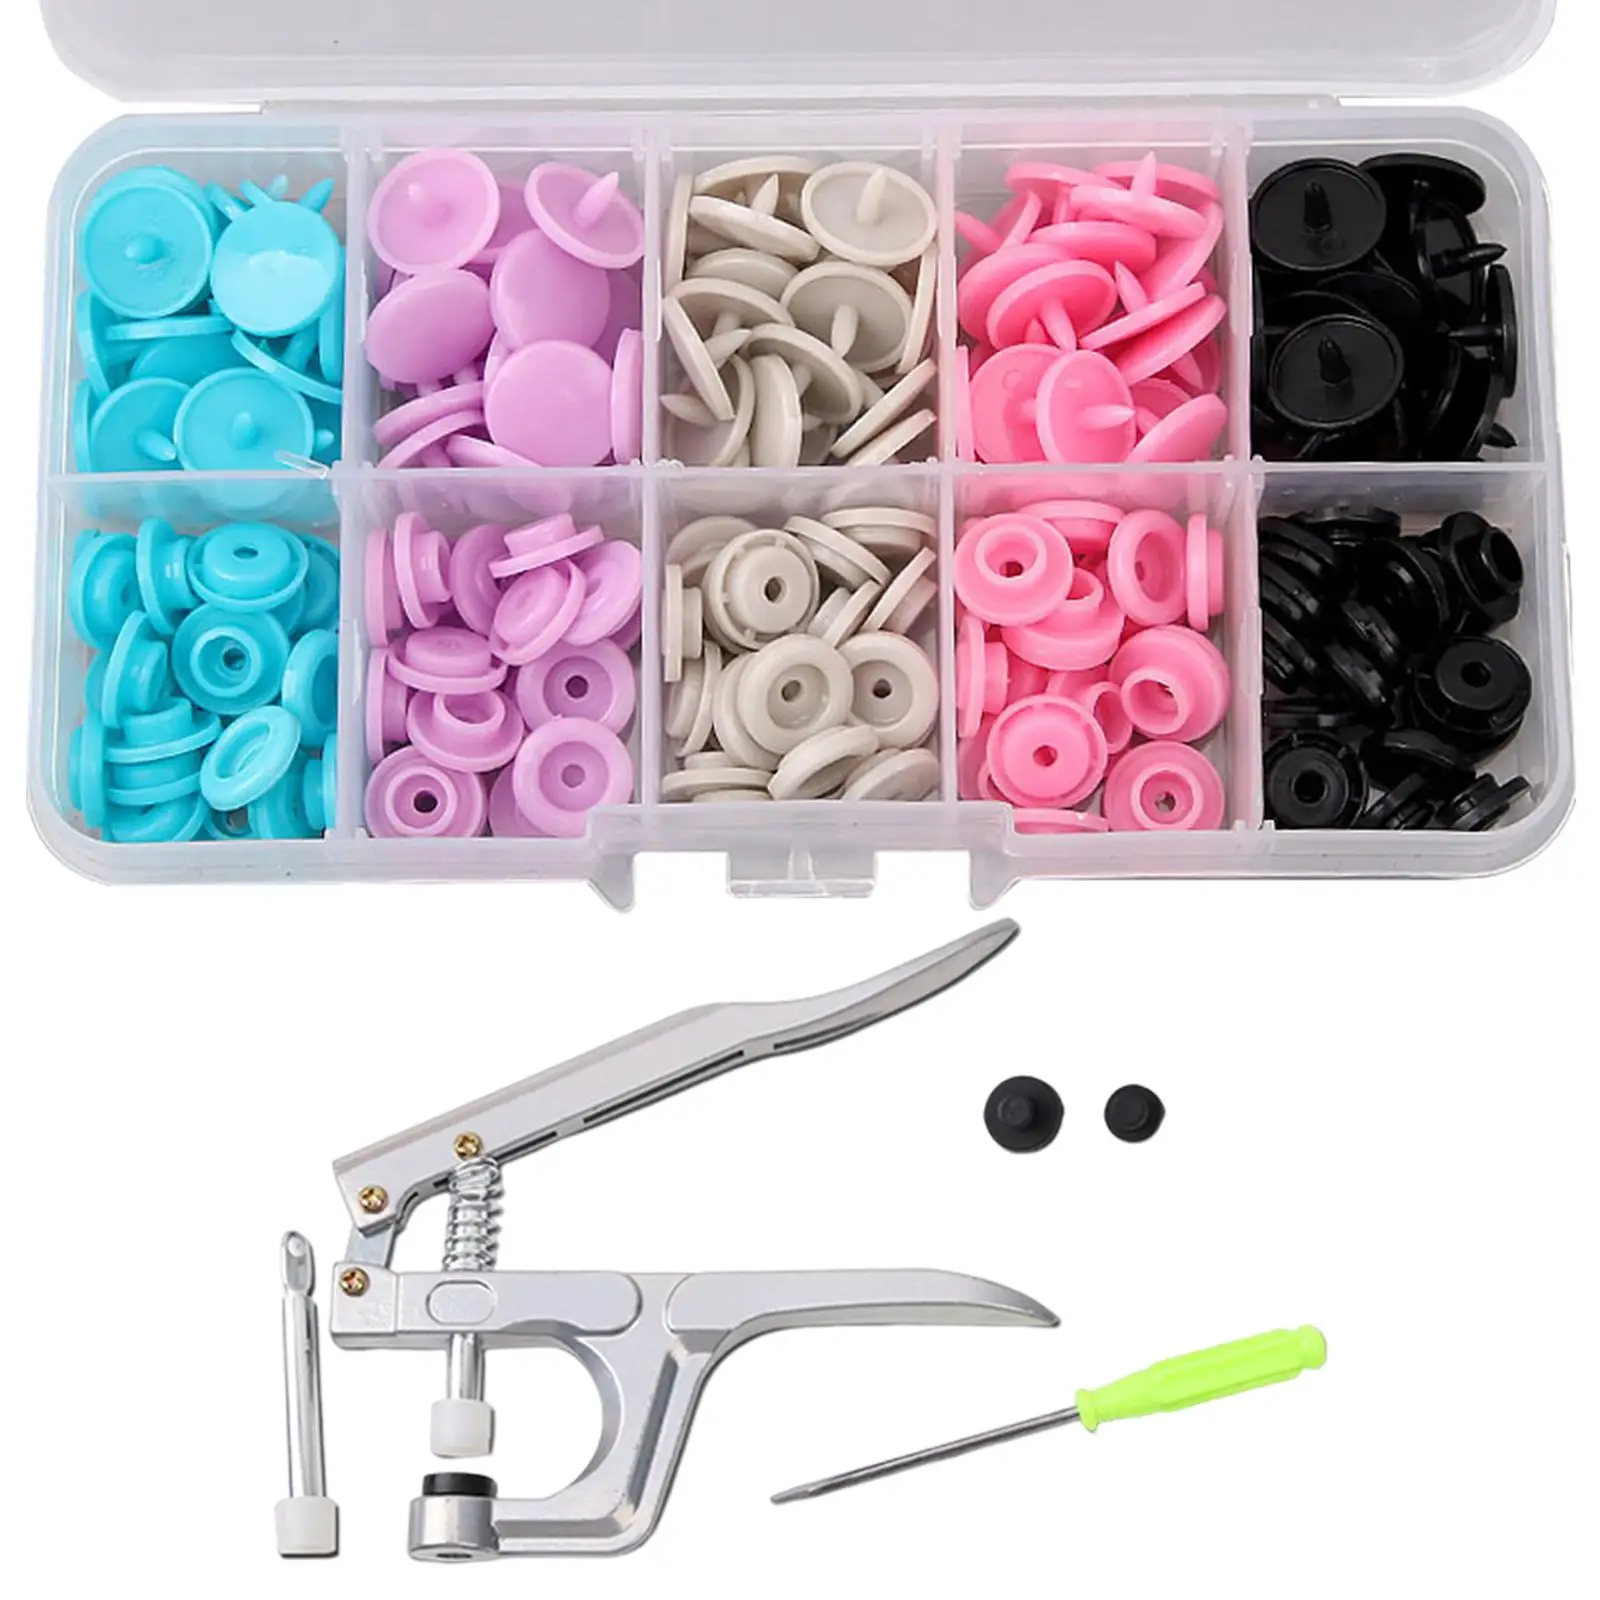 50 Sets Sewing Snaps Installation Tool Buttons Plastic Snaps Mixed Colors Snaps with Snap Pliers